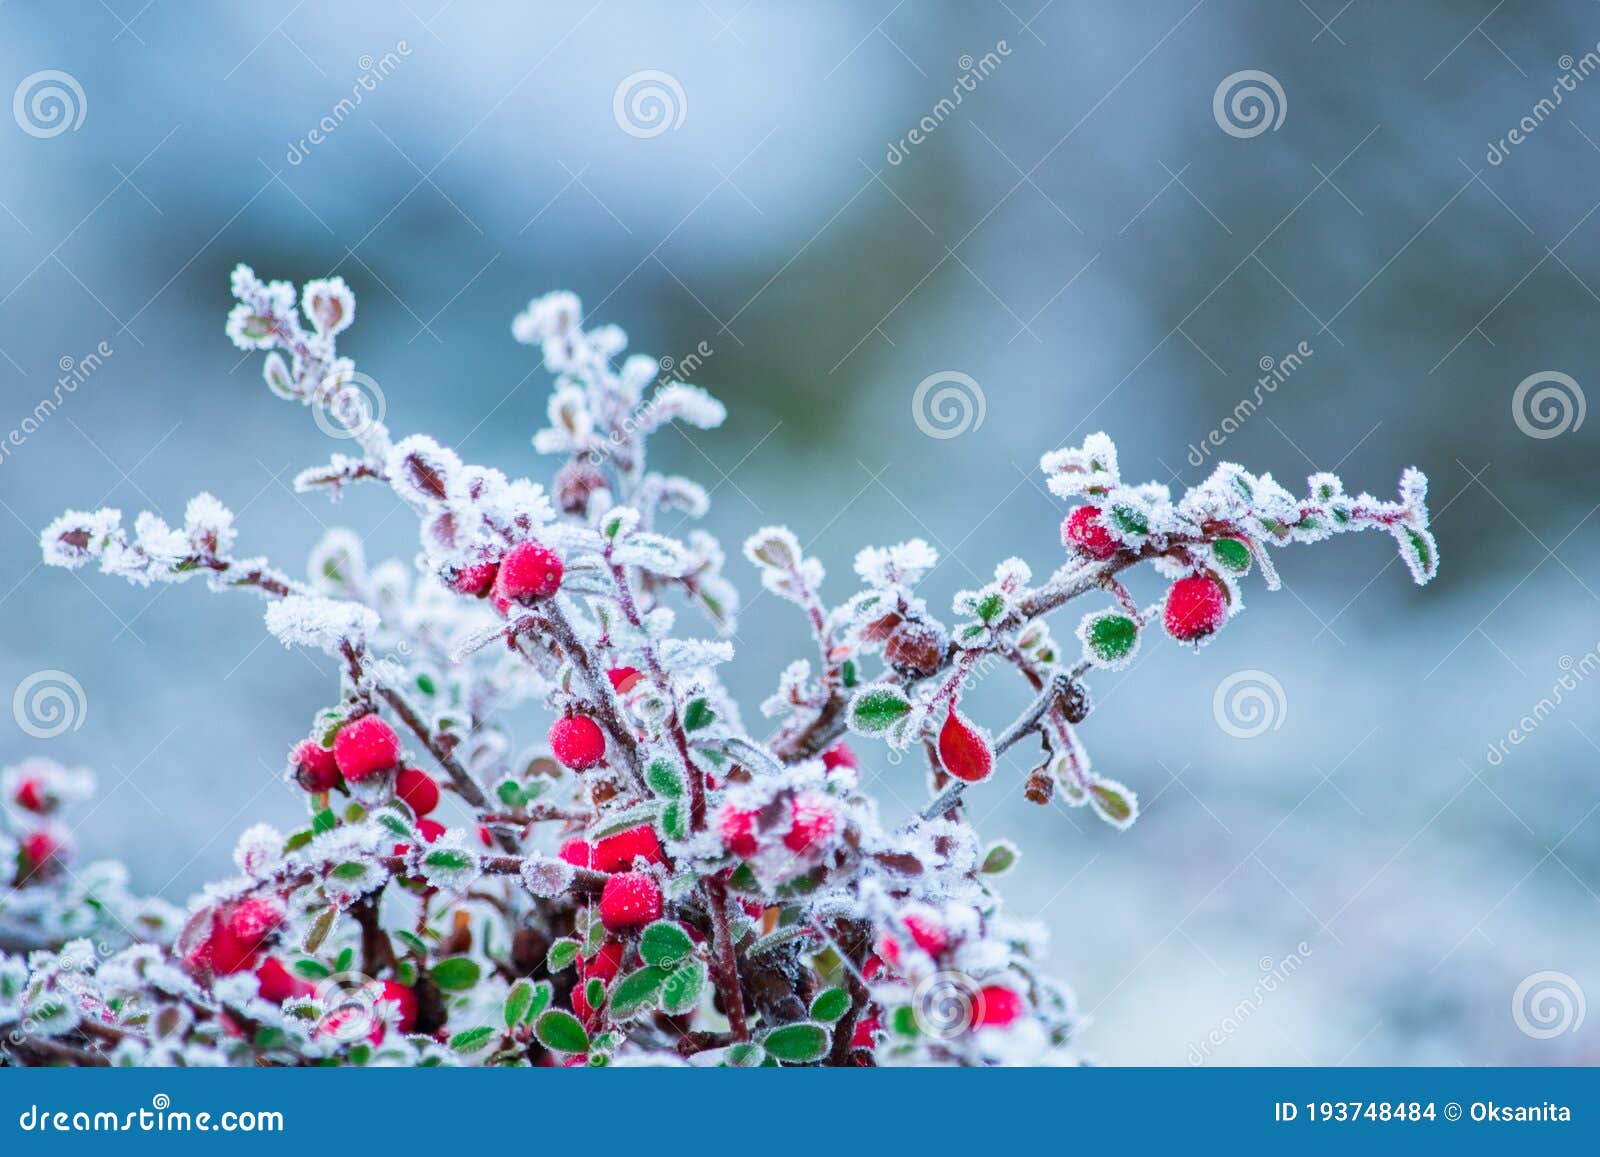 Frozen Nature with Red Berries. Winter Background. Stock - Image of frosty, berries: 193748484